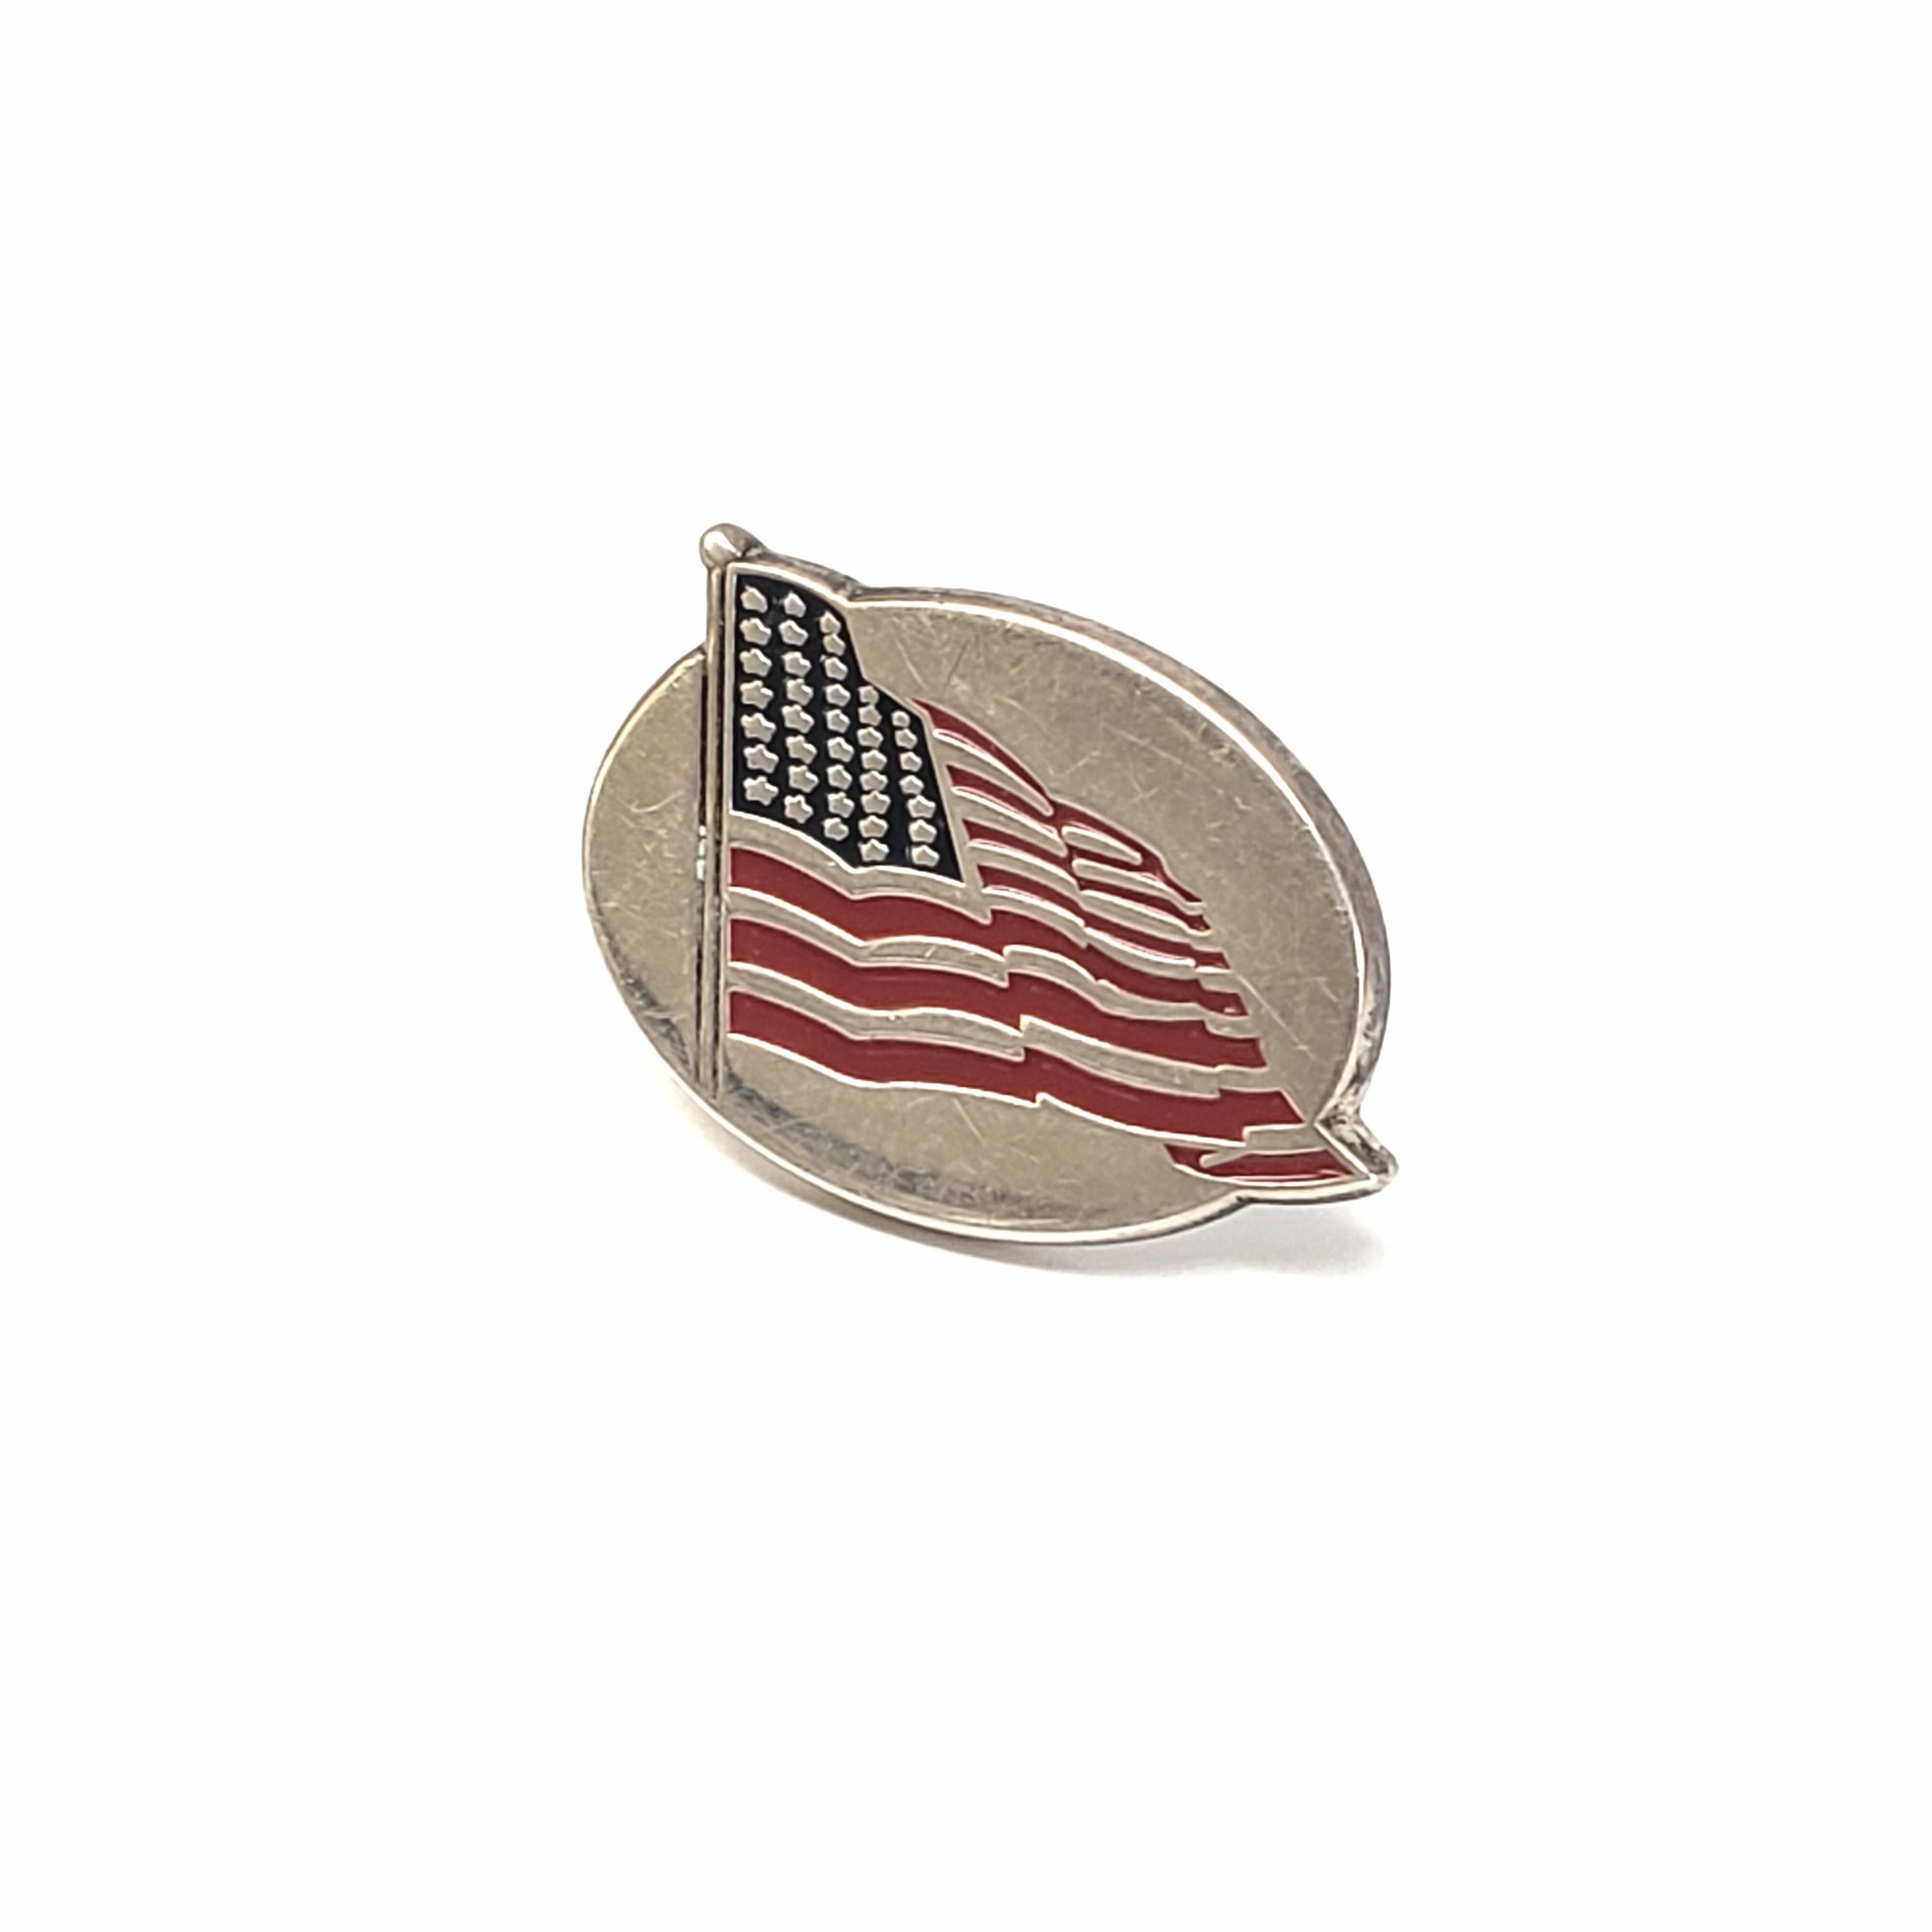 Vintage sterling silver and enameled American Flag lapel pin by Tiffany & Co, circa 2001.

This classic Tiffany design features an oval pin with a waving American Flag. No backing.

Measures 7/8